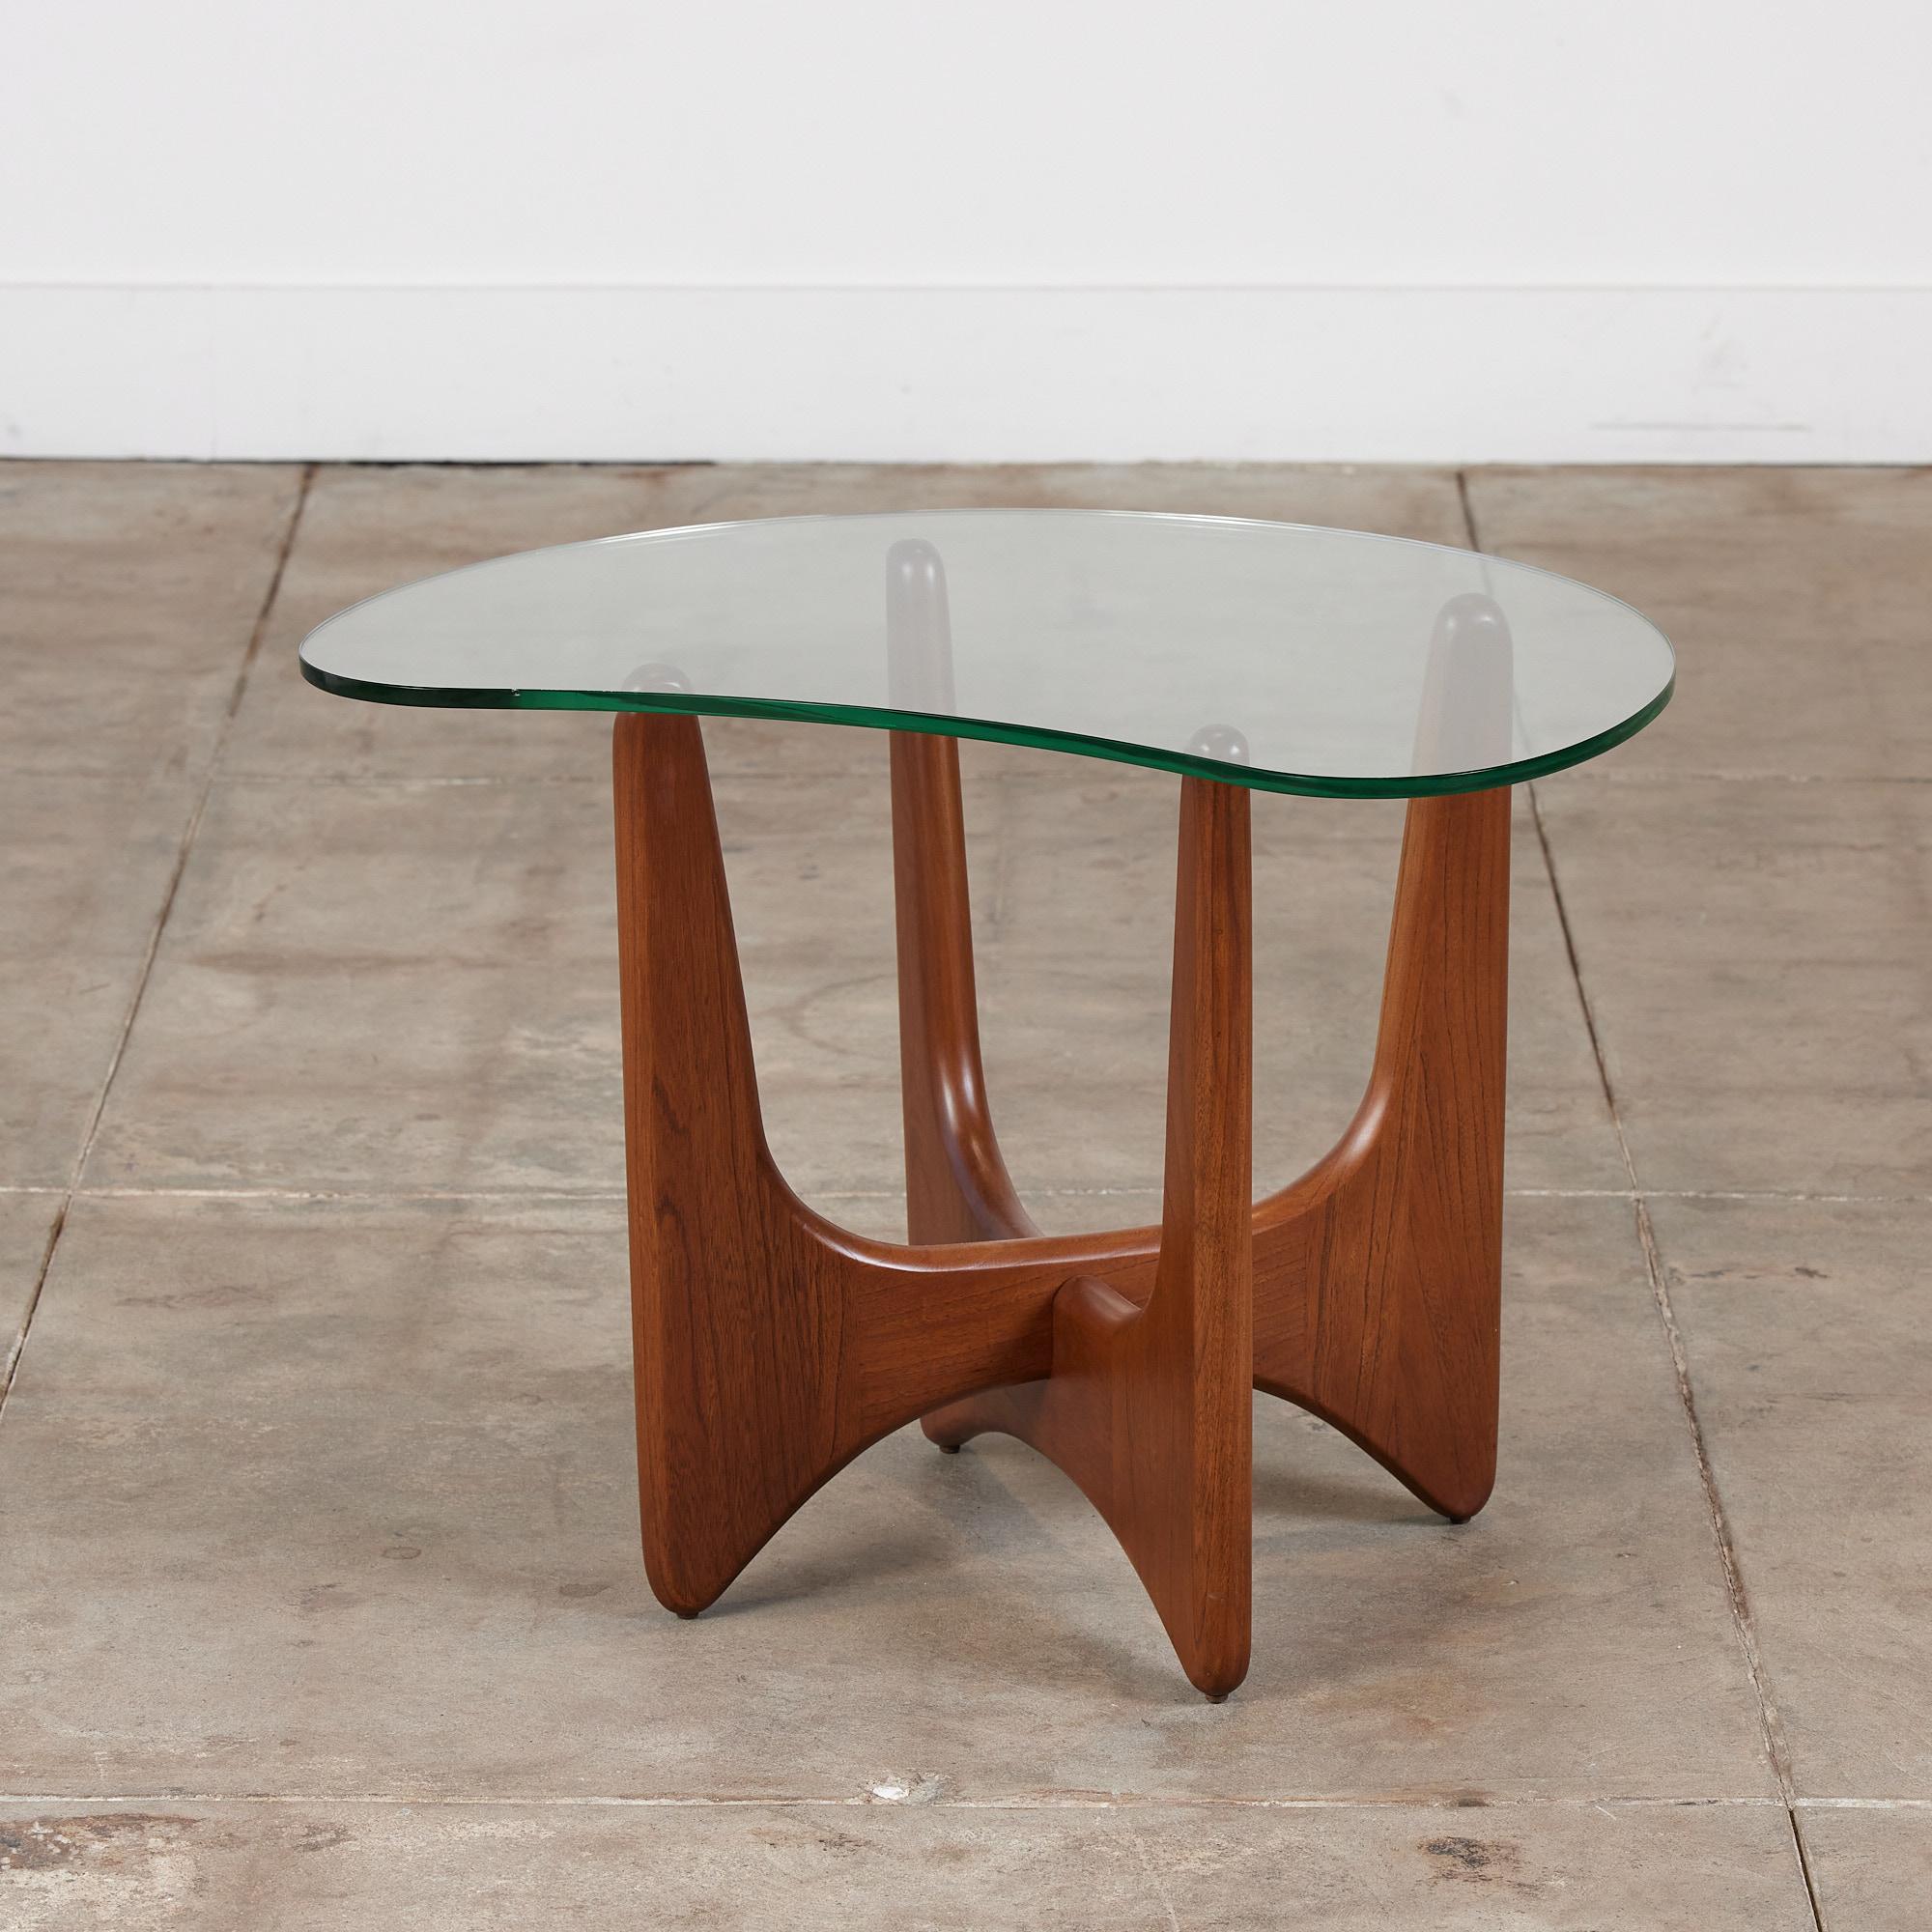 Adrian Pearsall for Craft Associates c.1960s, USA. This table features an organic glass shaped table top and beautifully refinished walnut base. The combination of the two elements makes this design a statement in any room.

Dimensions: 27” width